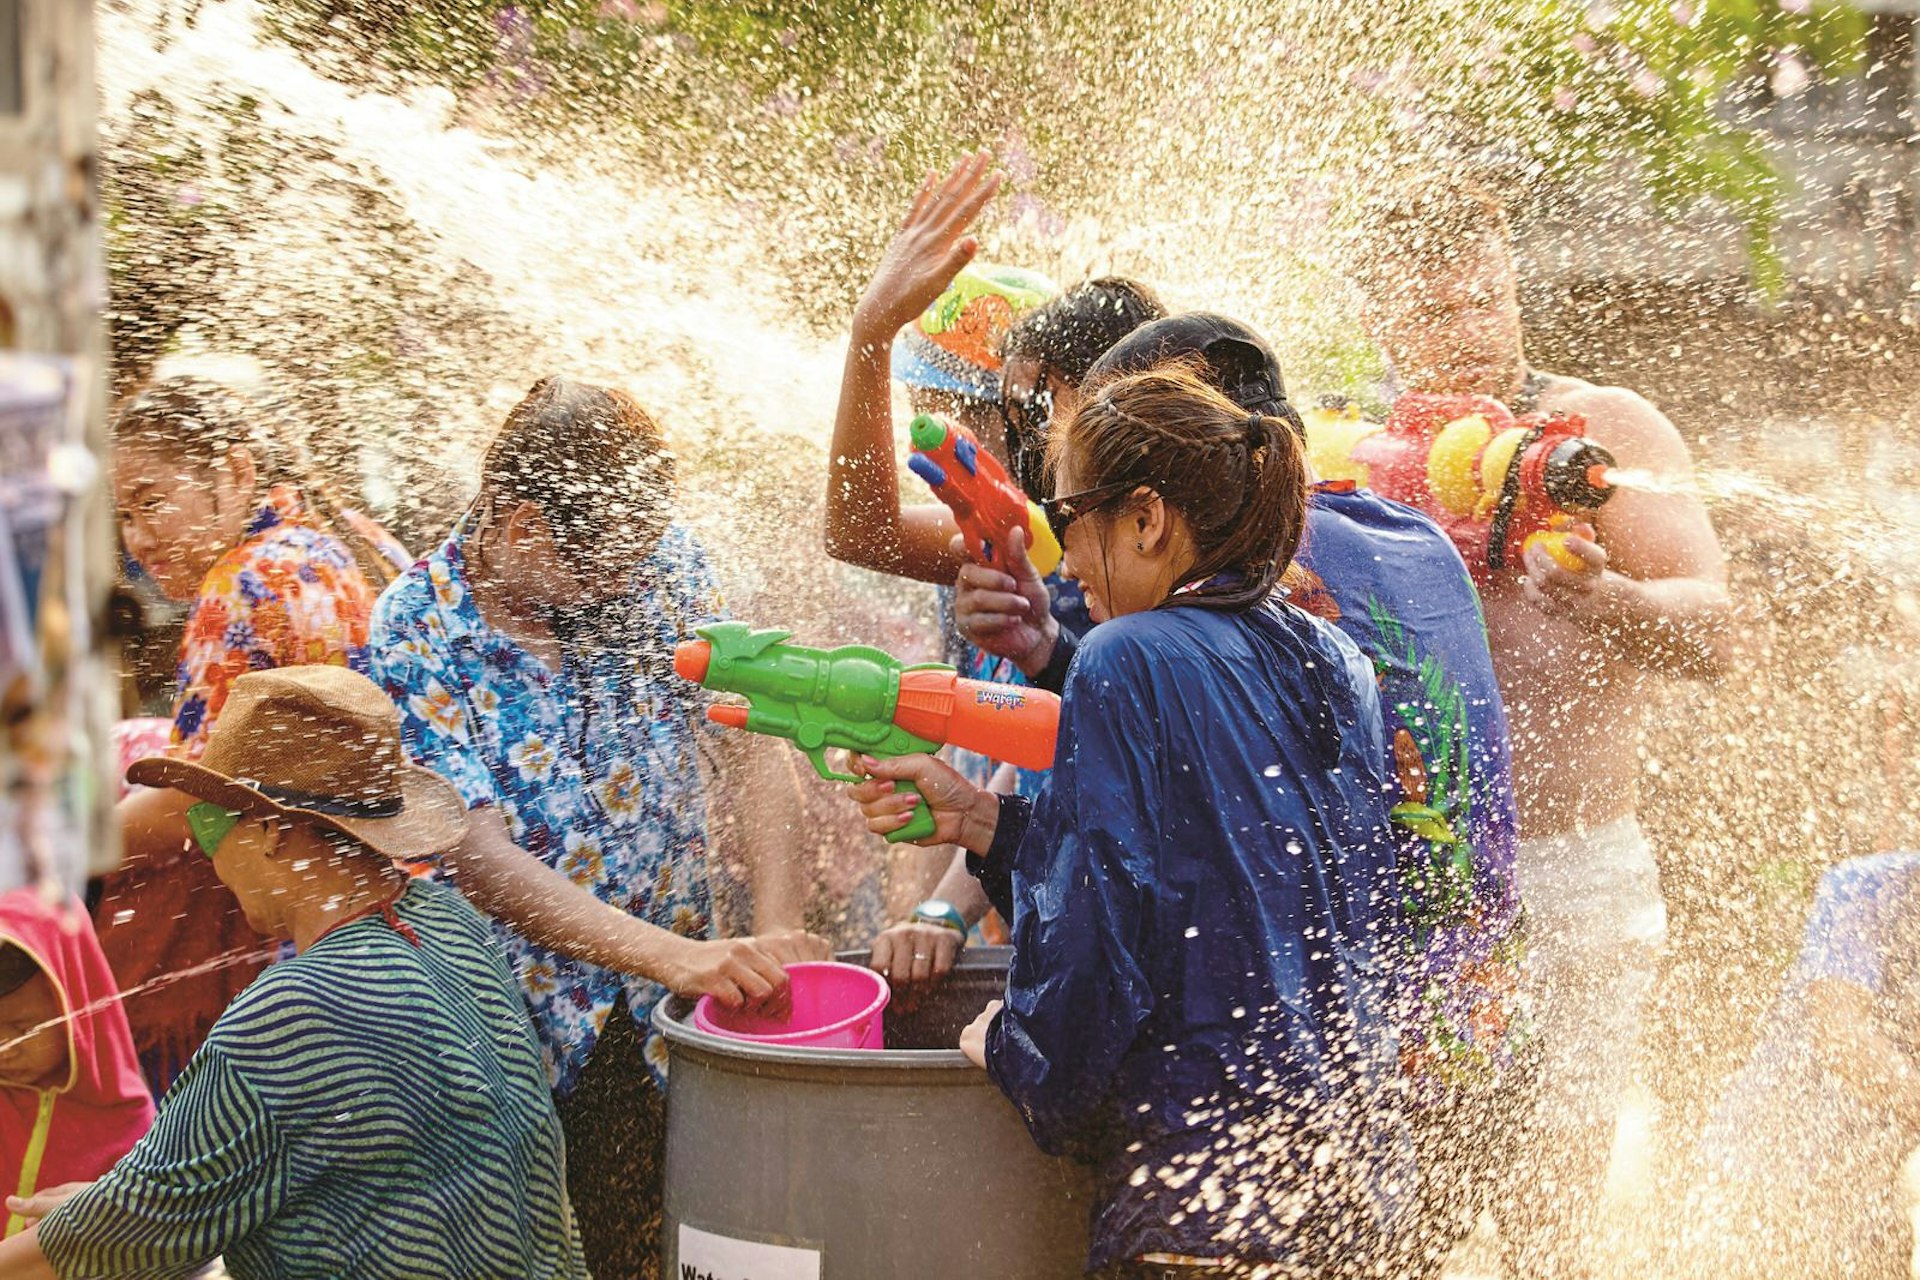 People soaking each other with water during Songkran Festival © Matt Munro / Lonely Planet